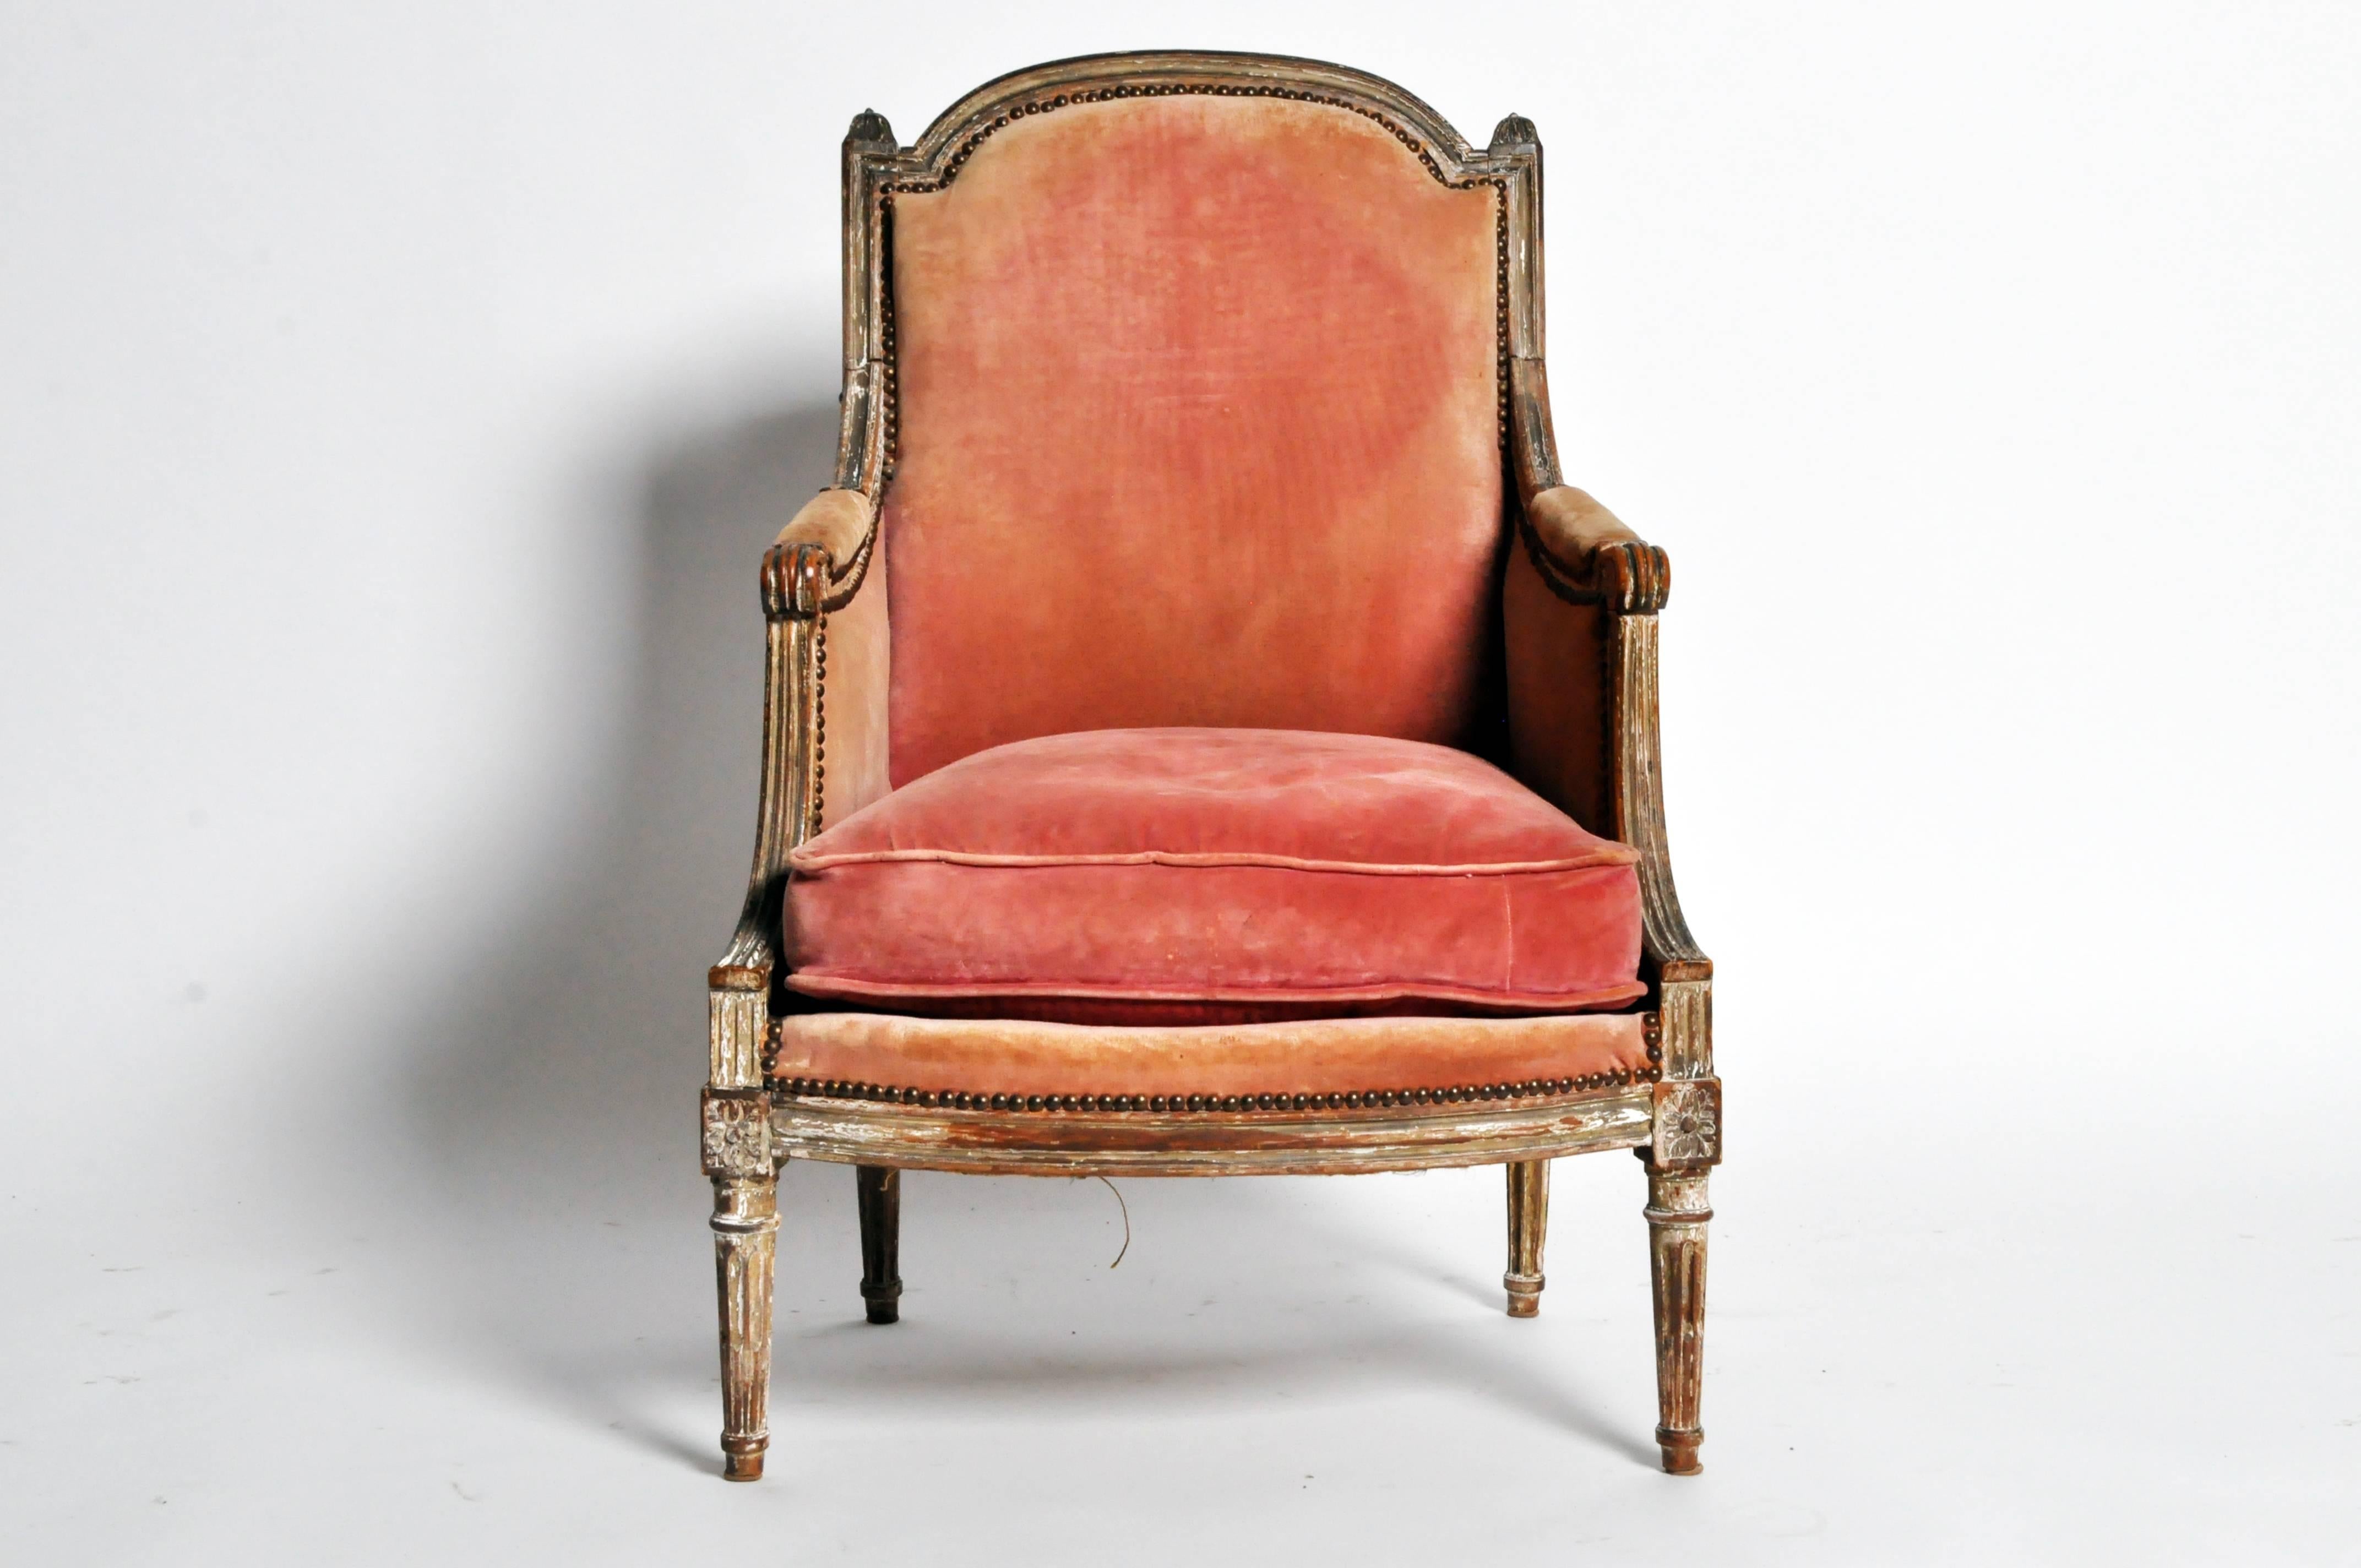 This impressive pair of Louis XVI style bergere armchairs are from France and are made from ashwood, mid-1800s.